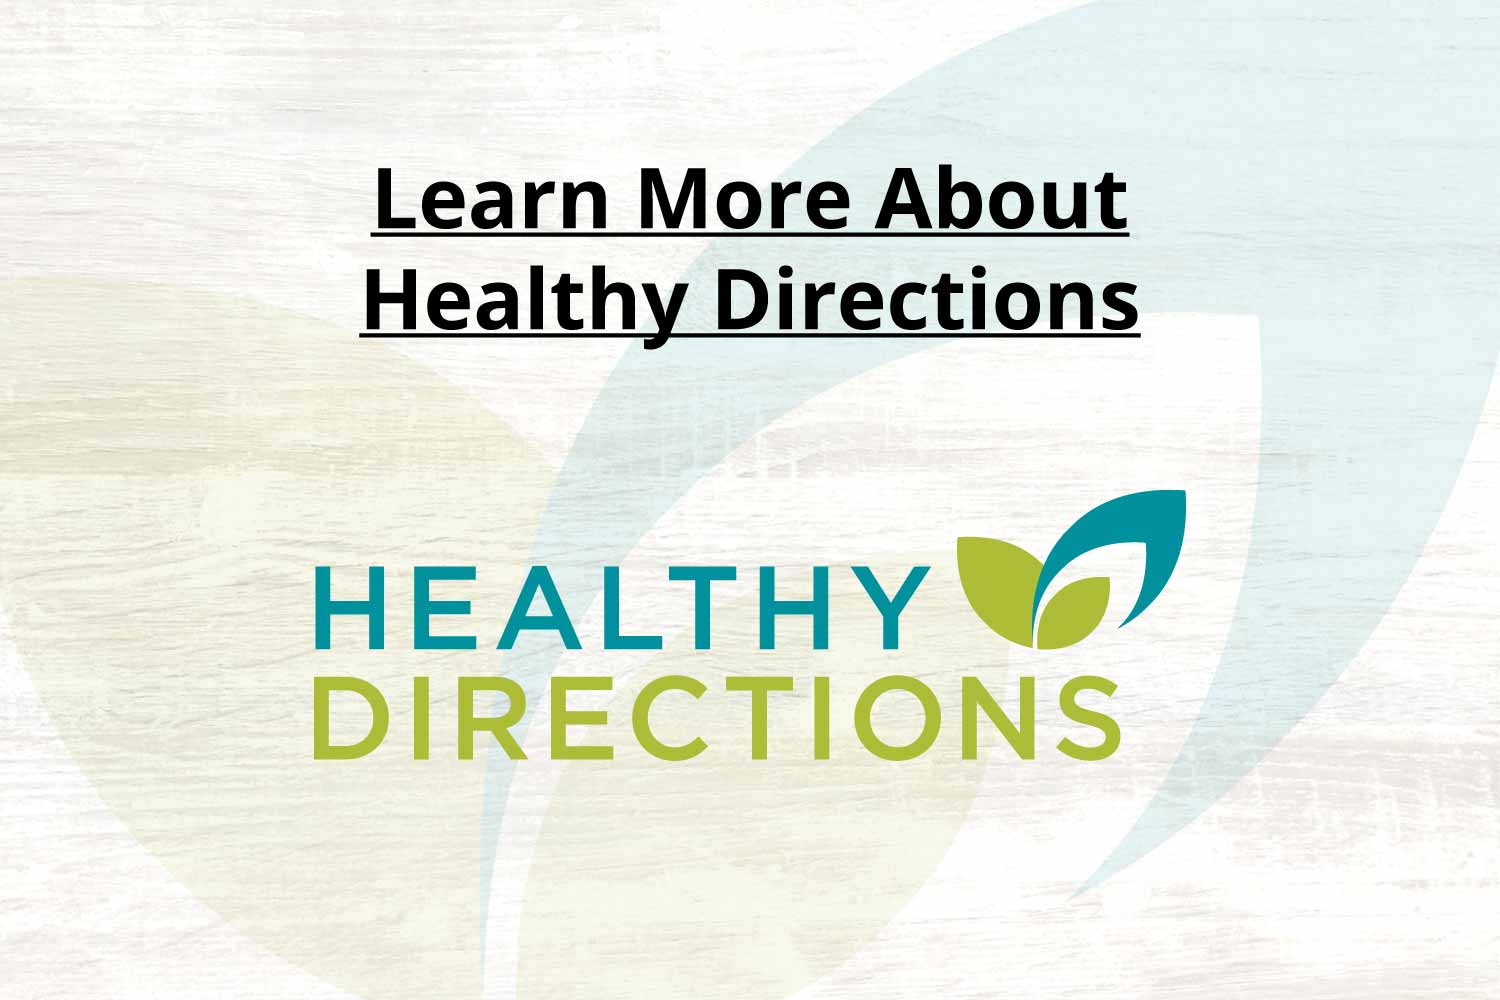 Learn More About Healthy Directions